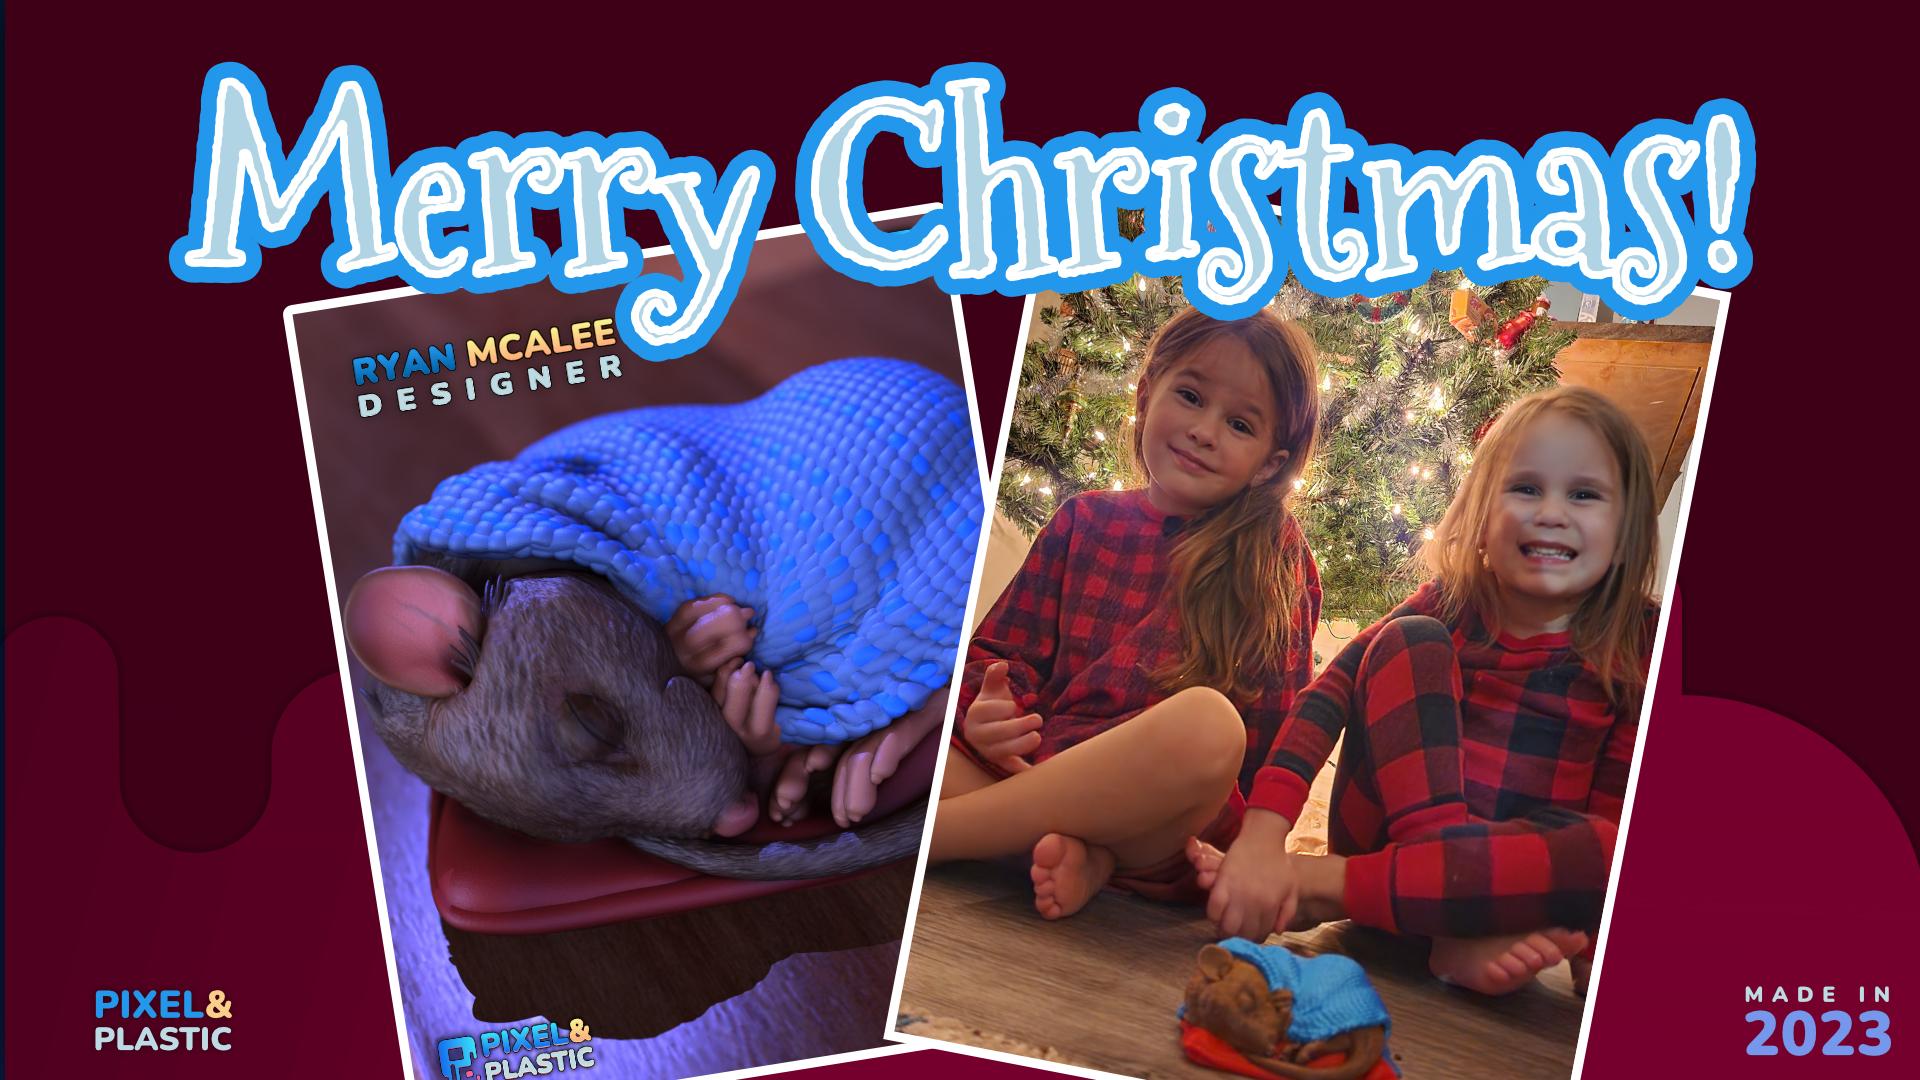 Not a creature was stirring, not even a mouse;